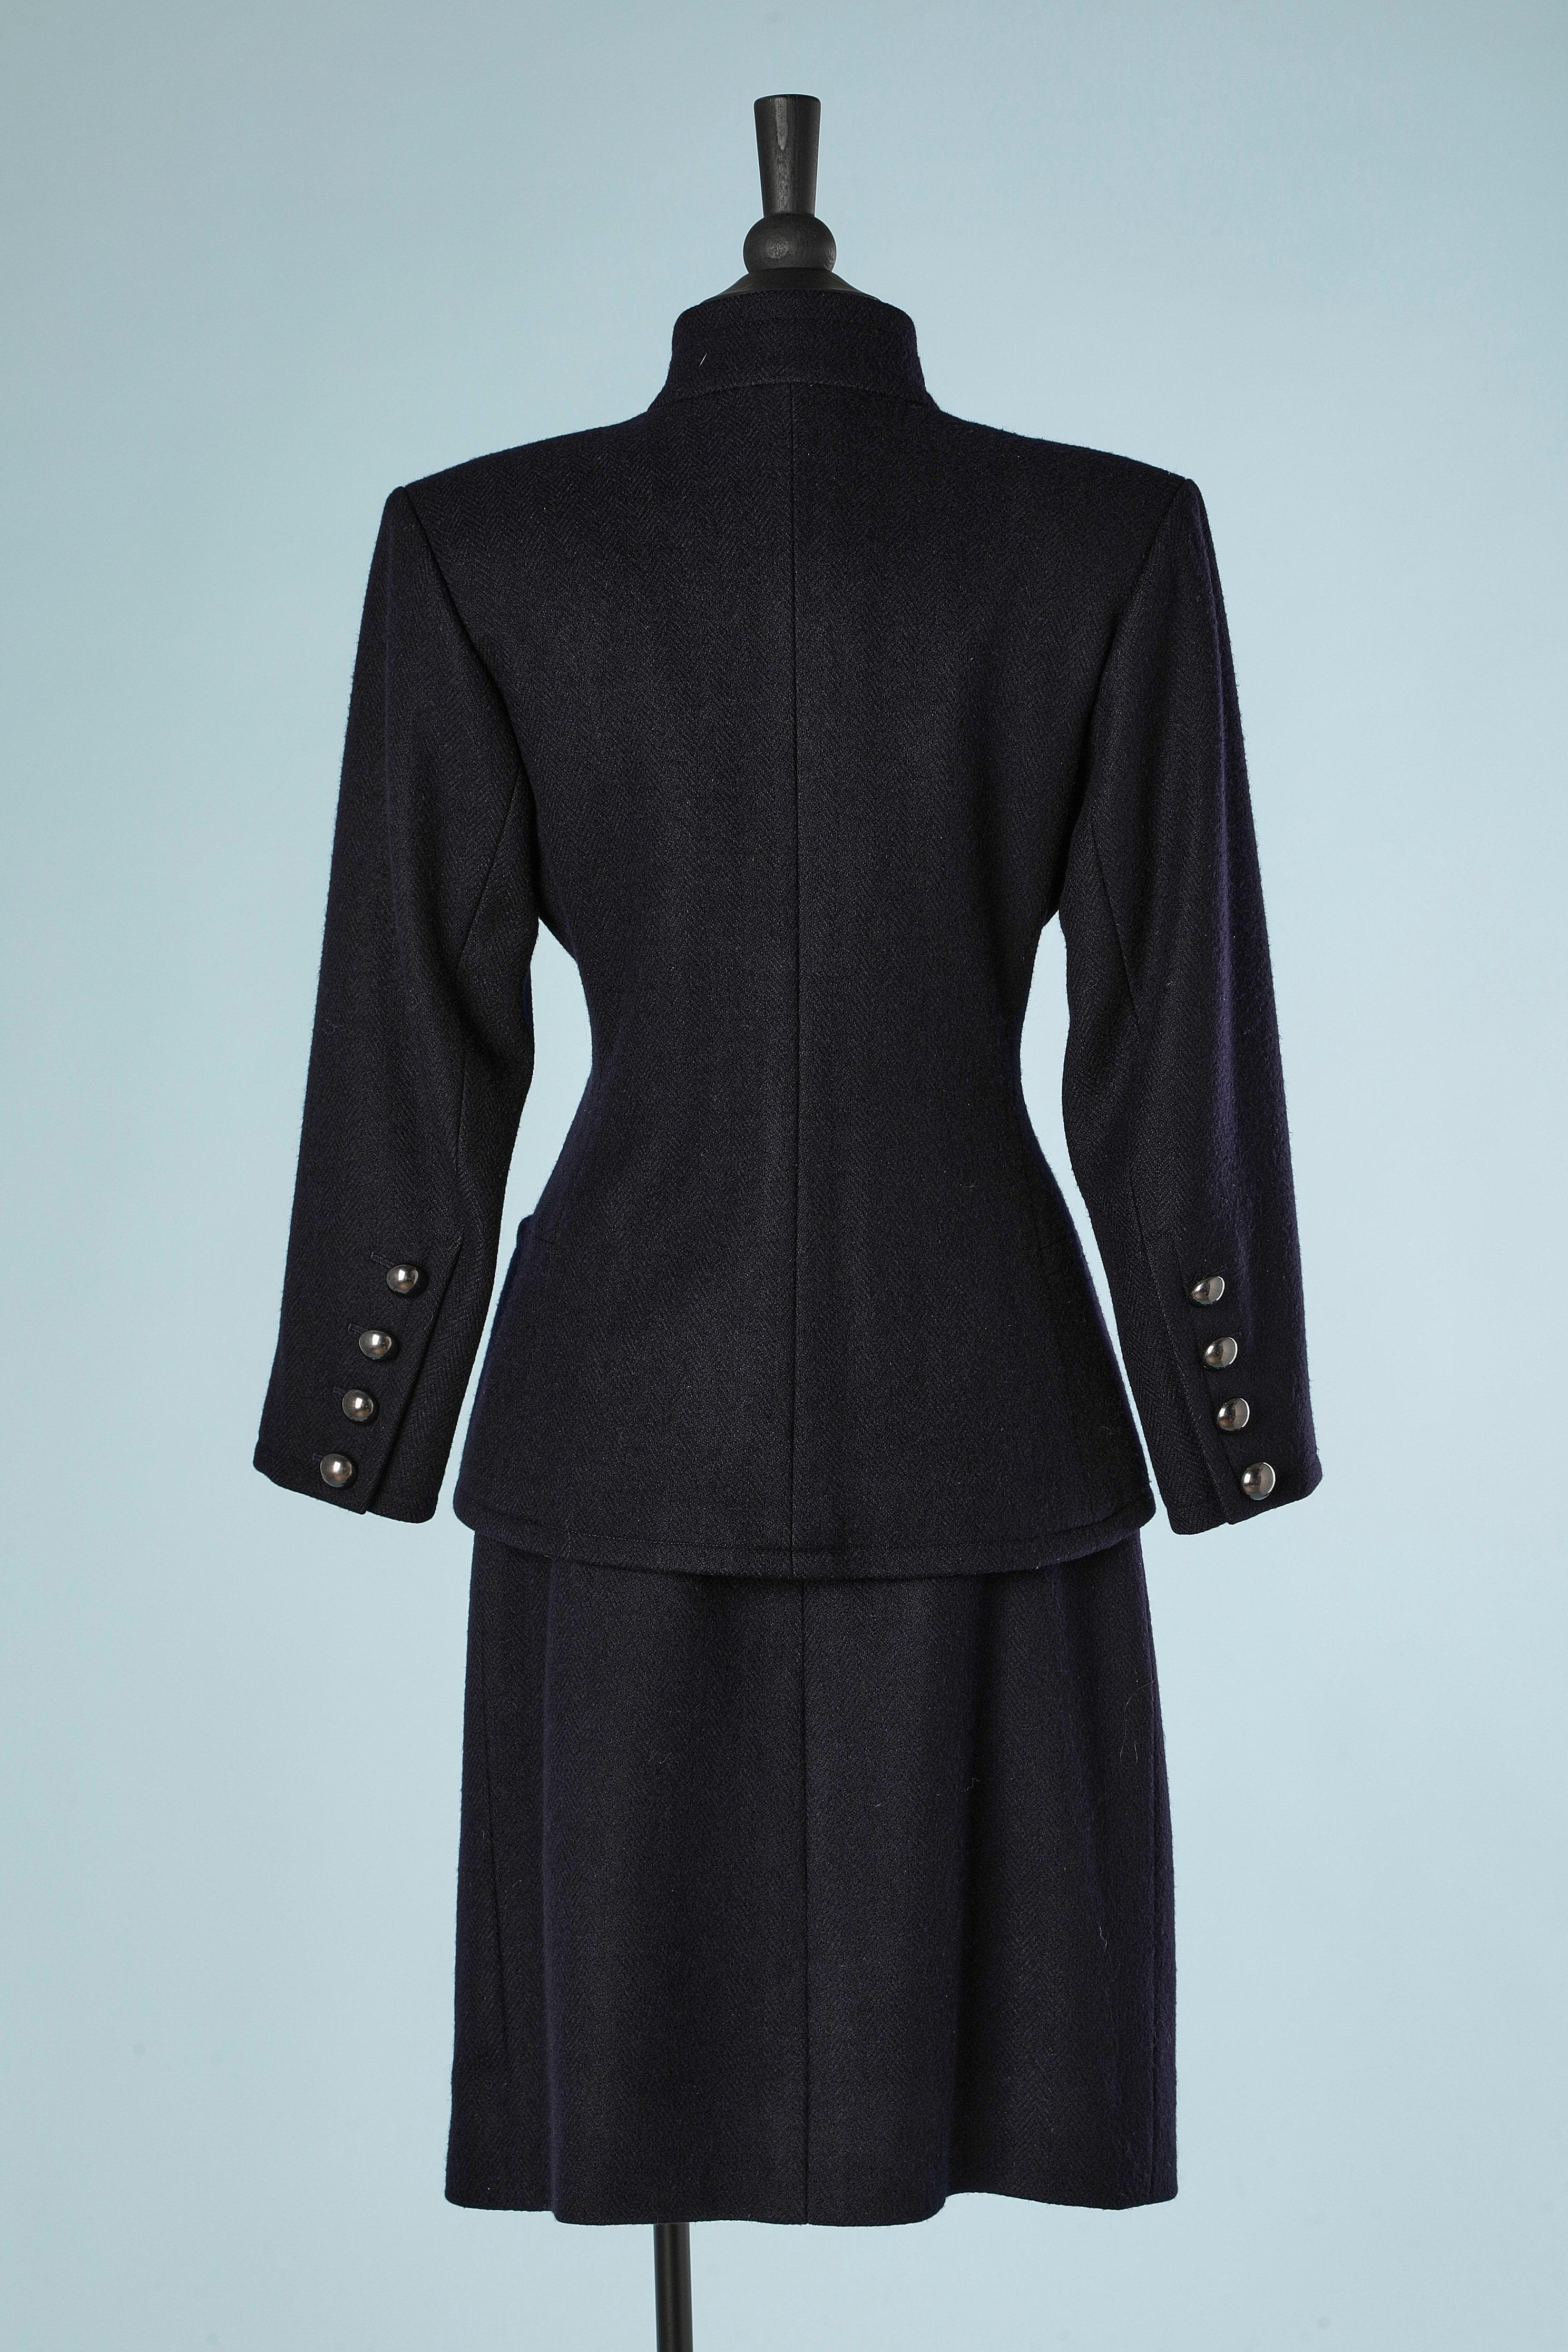 Black wool and cashmere skirt-suit Yves Saint Laurent Rive Gauche  For Sale 3